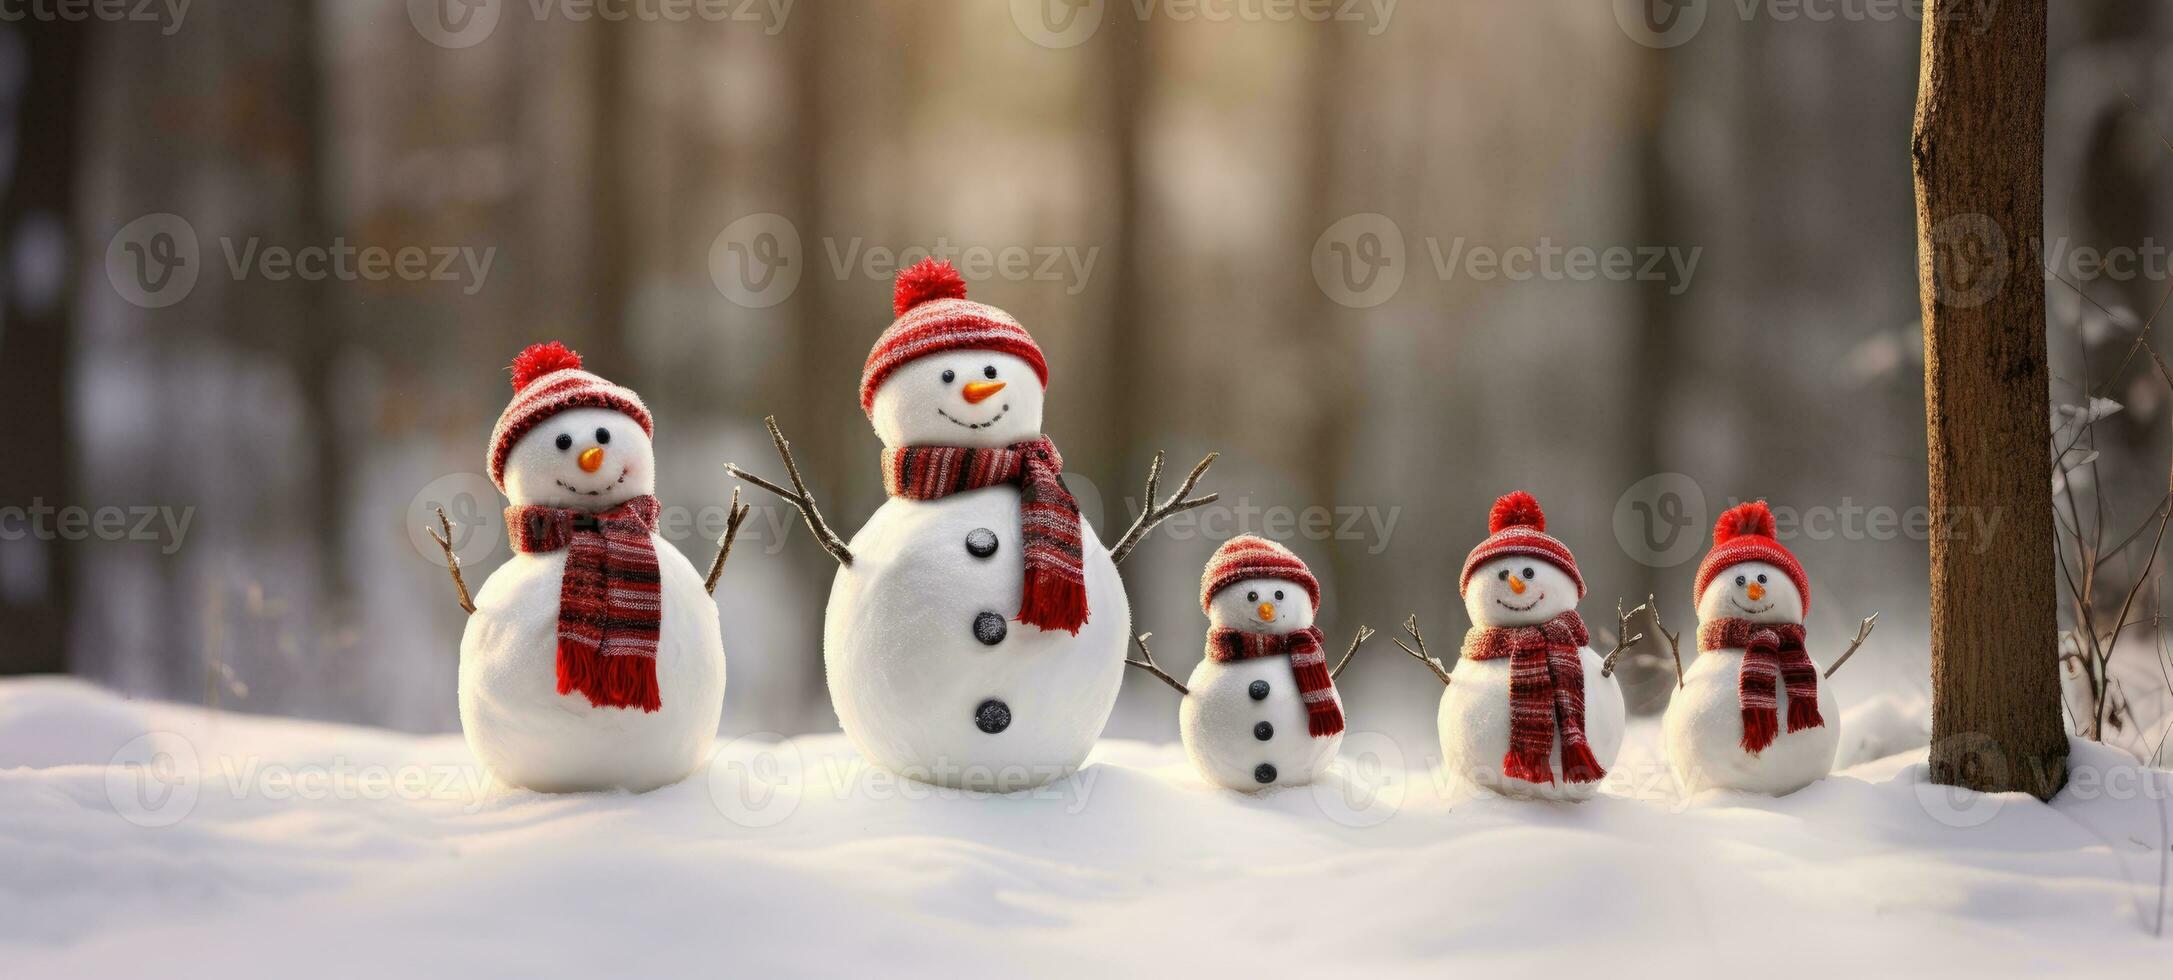 family snowman with scarf in snow forest greeting card xmas christmas photo